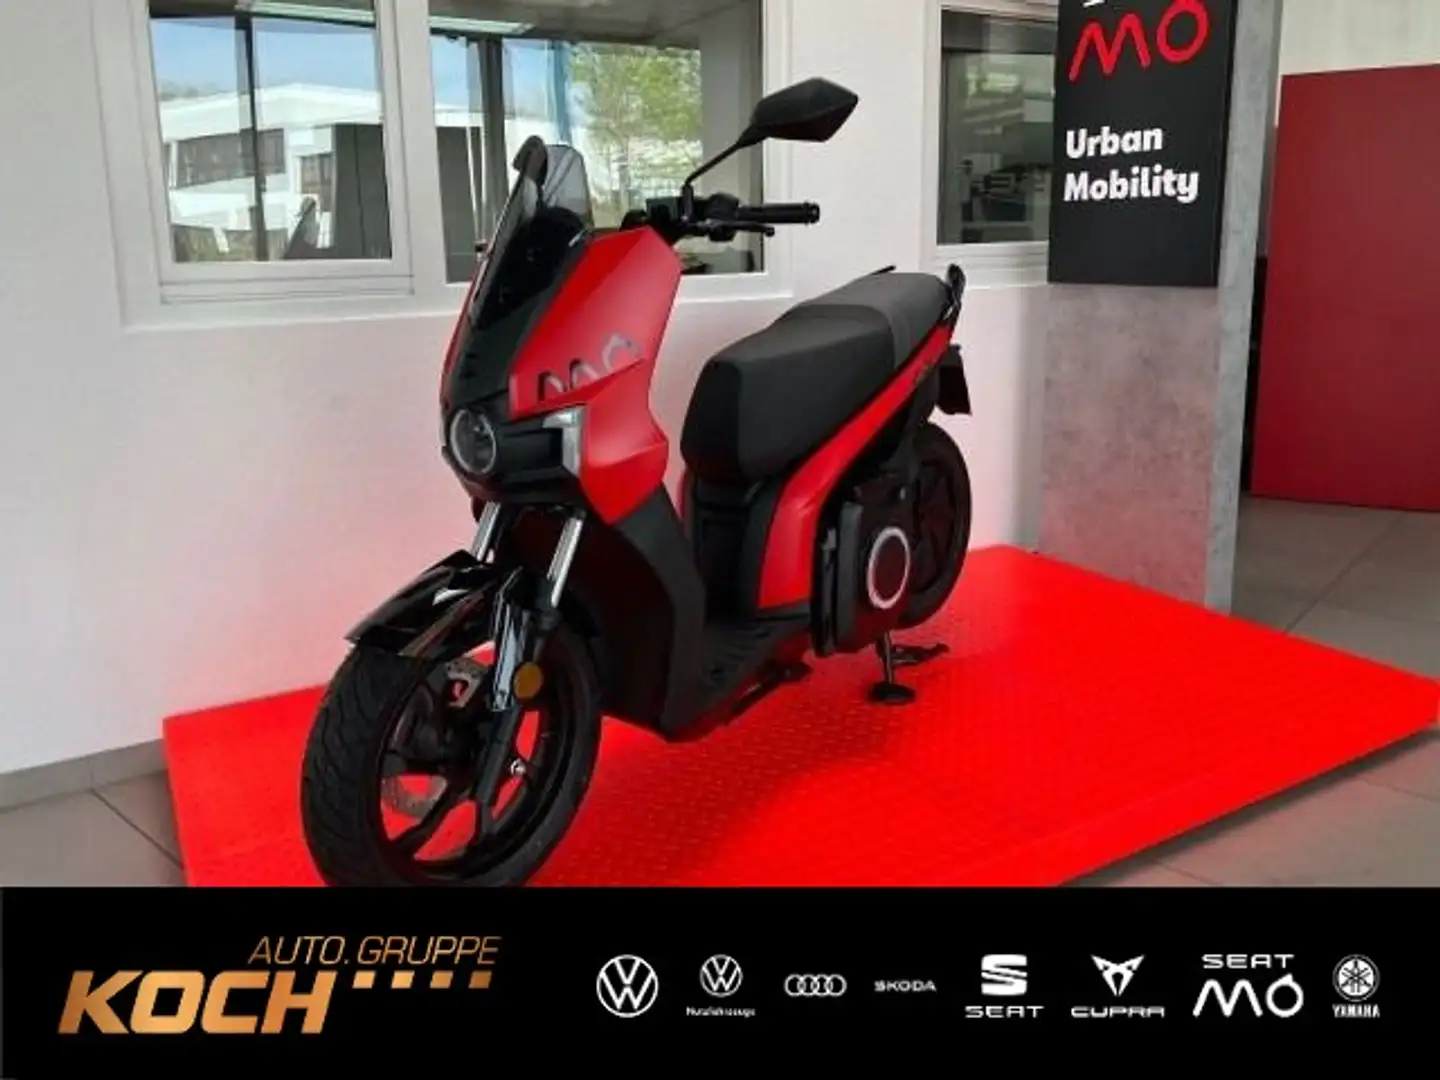 SEAT Seat Mo 125 Rosso - 1